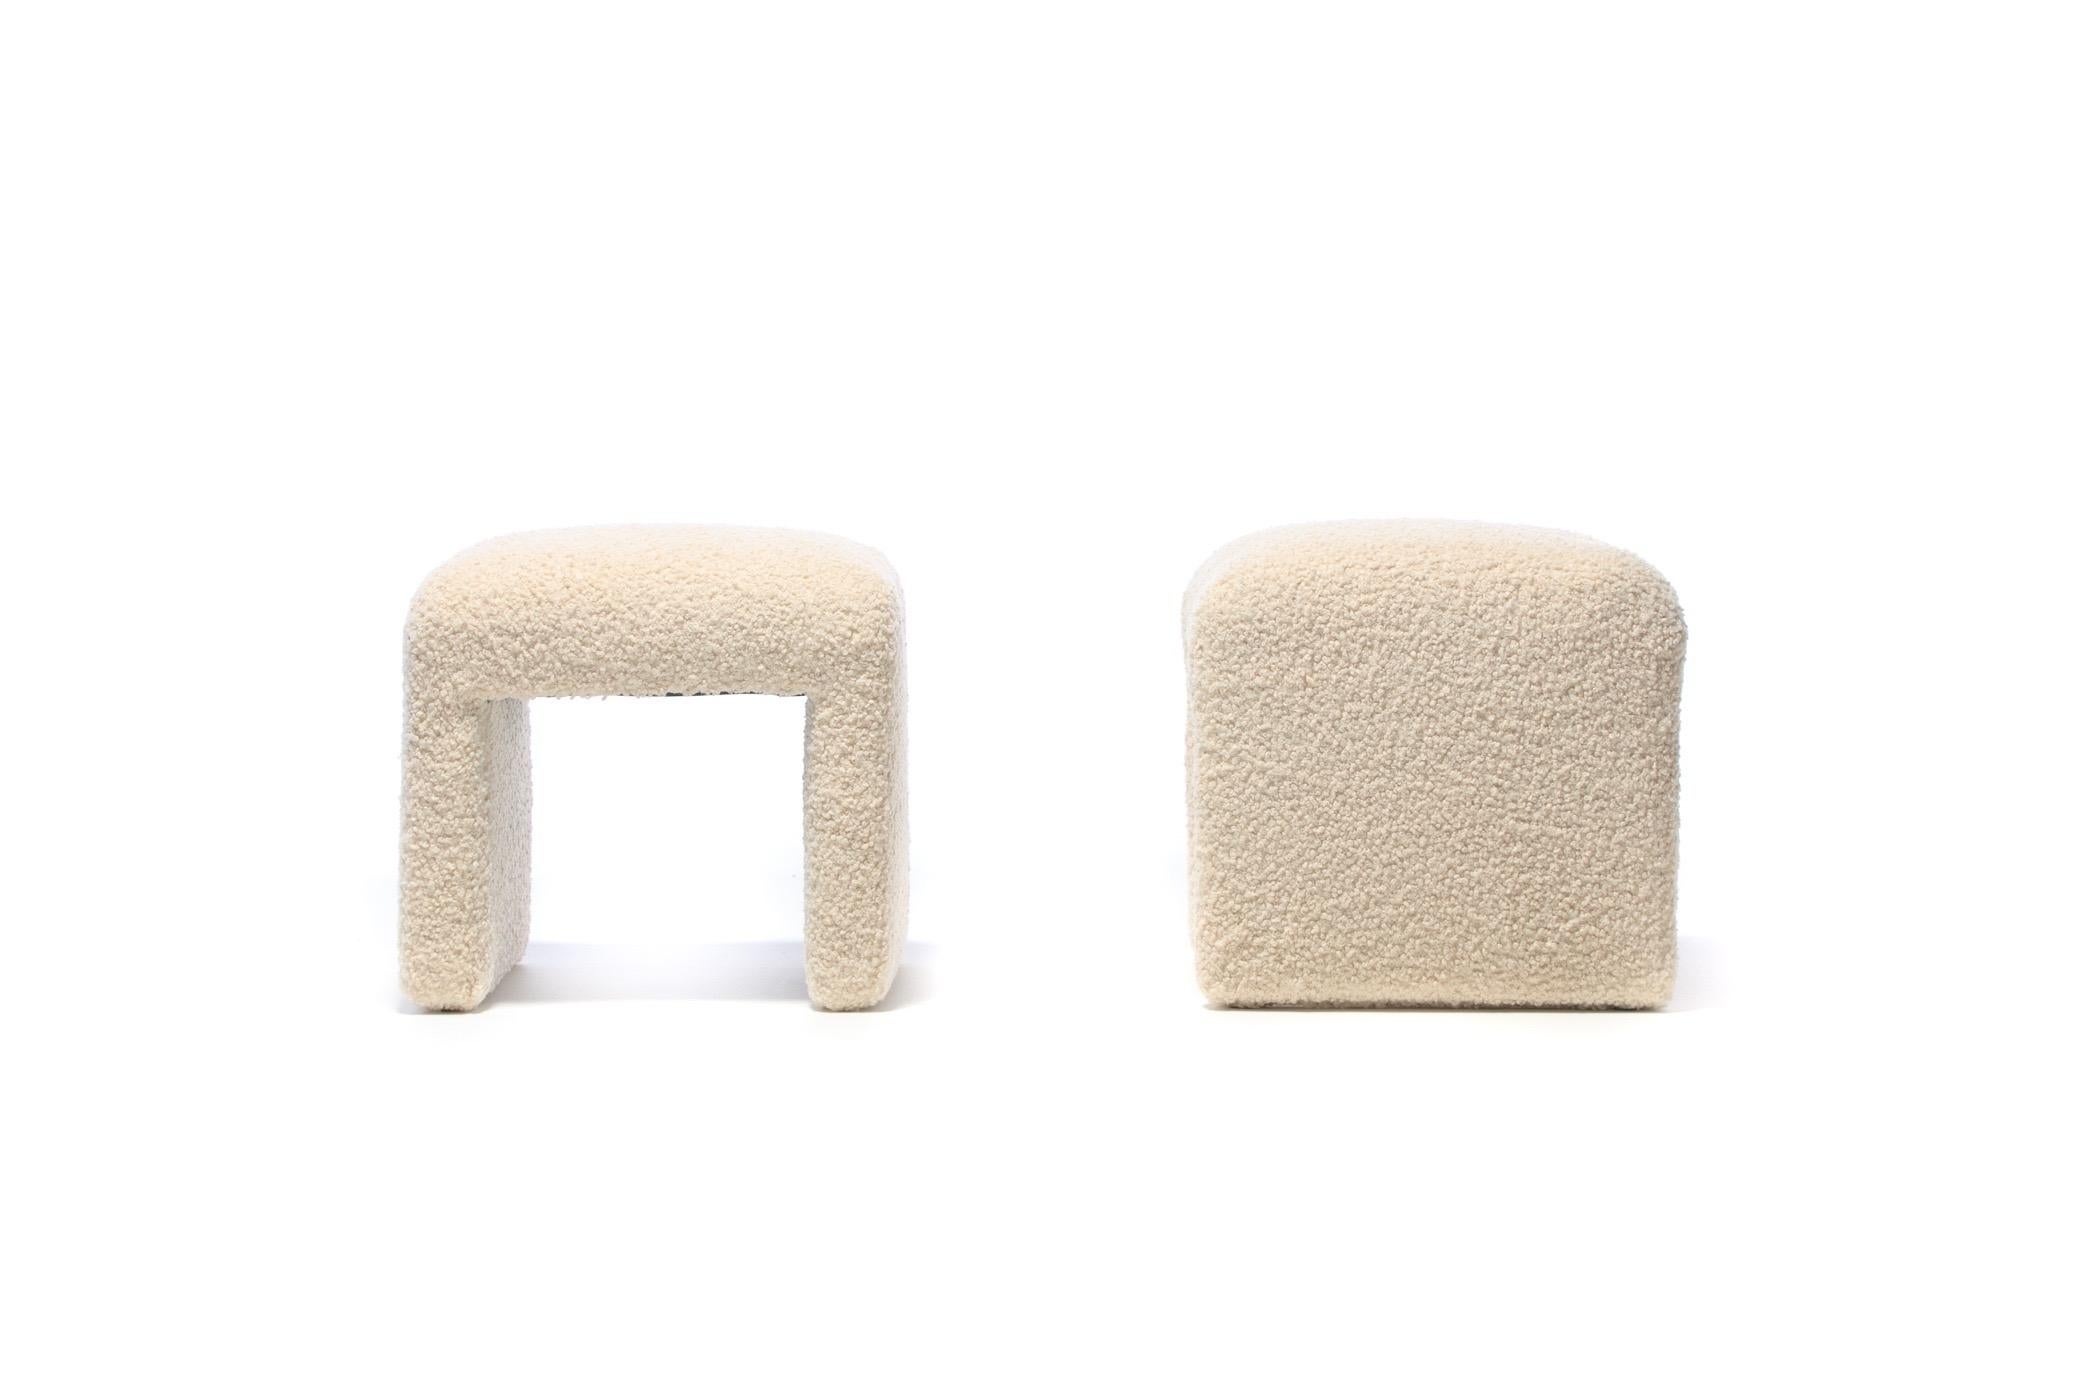 American Pair of Waterfall Benches in Ivory Bouclé by Directional, circa 1970s